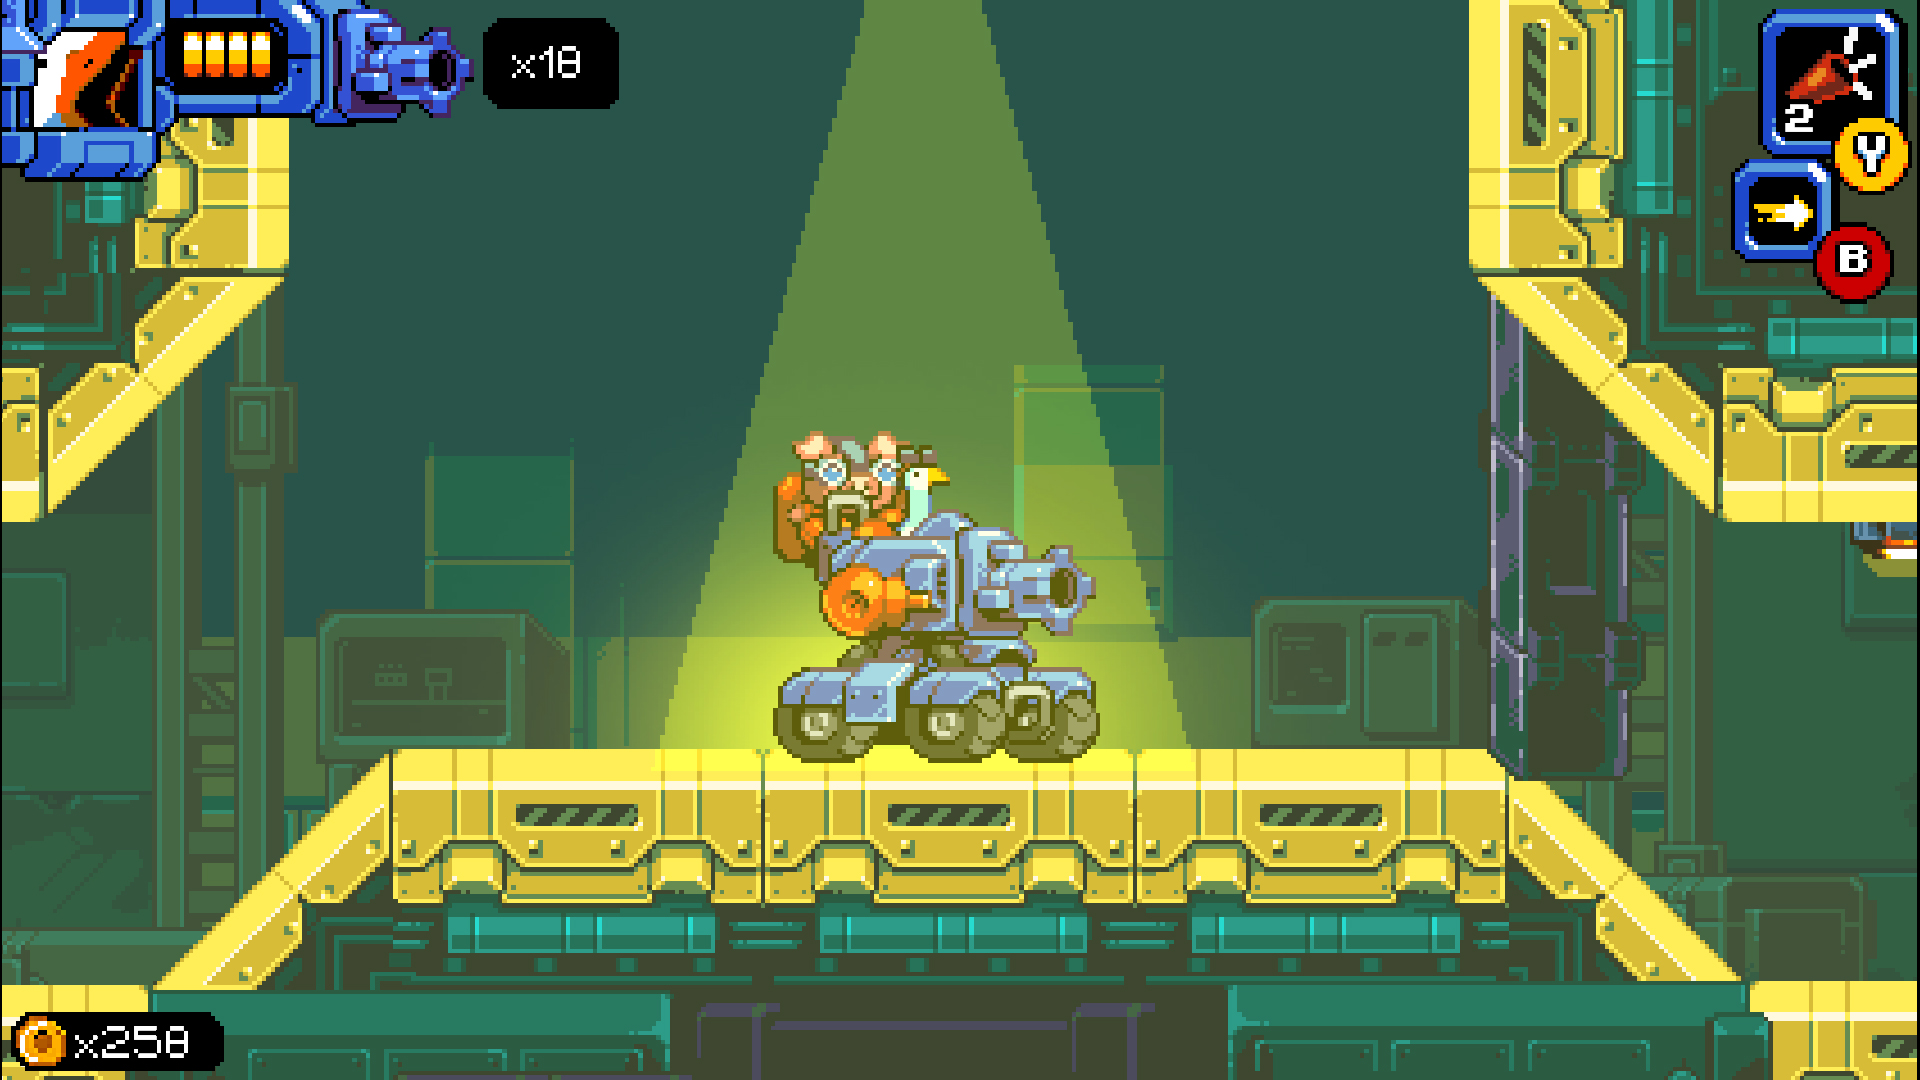 Image from Mighty Goose Showcasing a Mecha